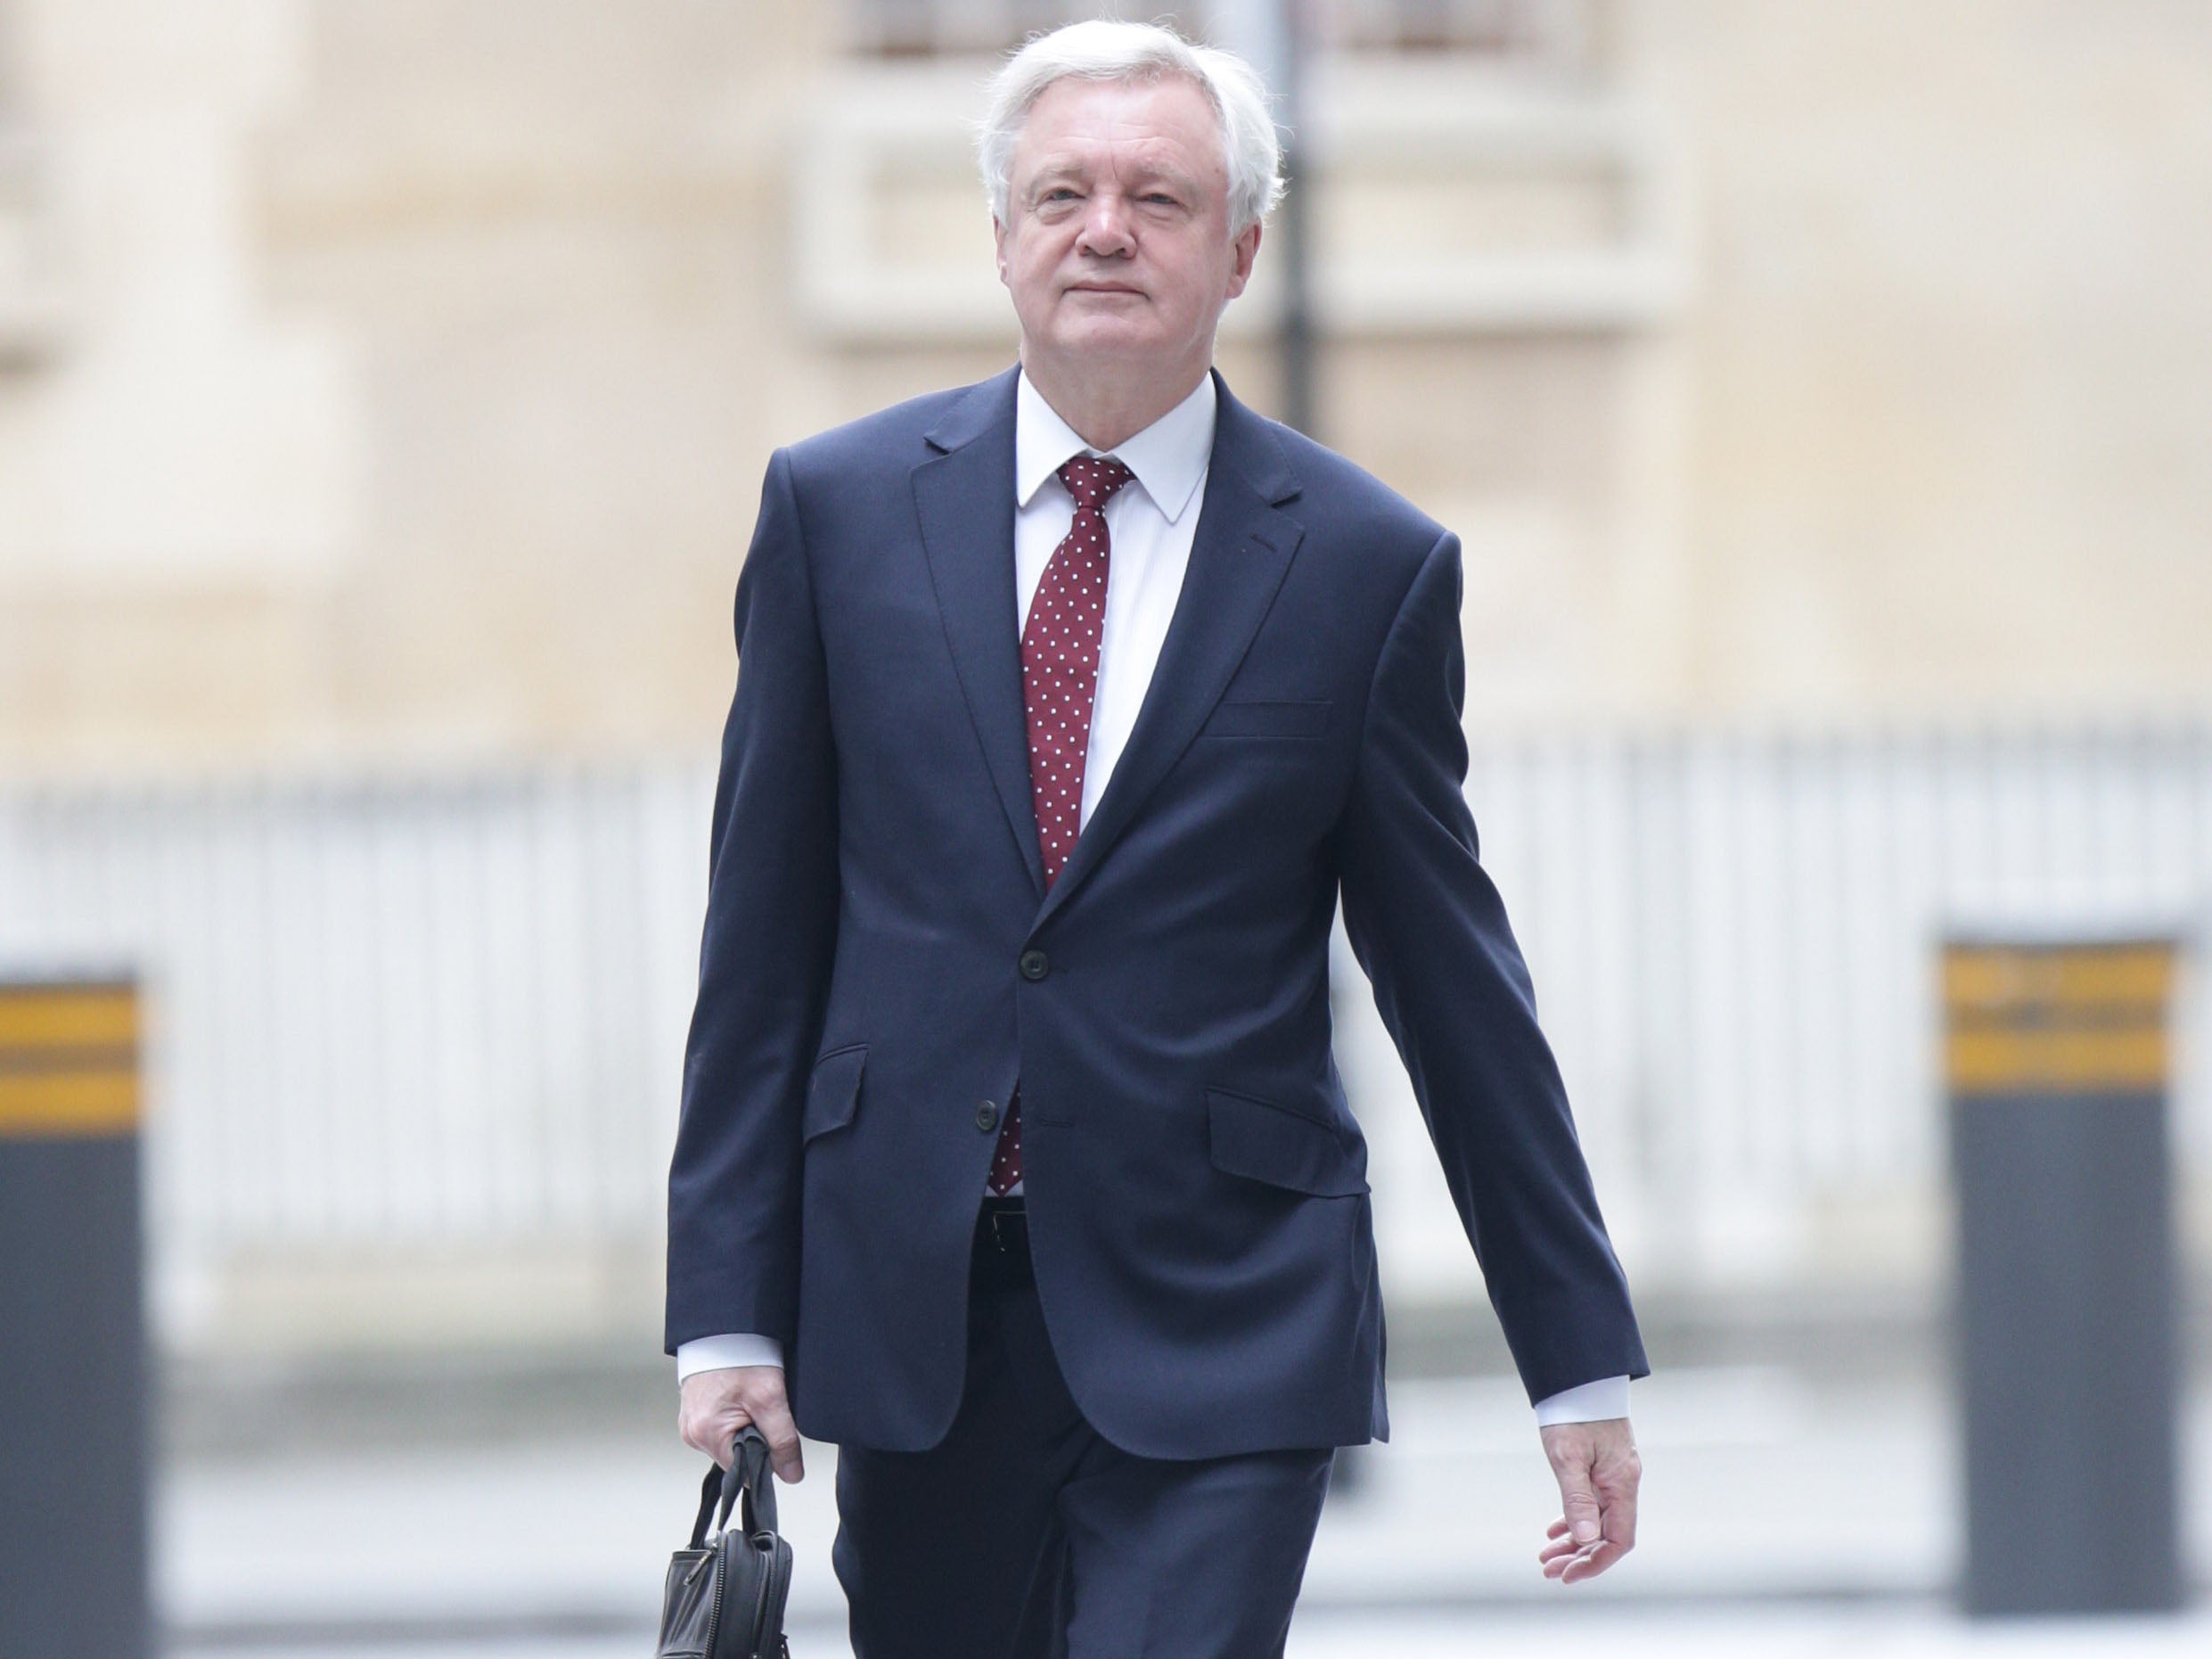 Brexit: David Davis set to clash with EU after insisting UK will sign trade deals while remaining in a customs union